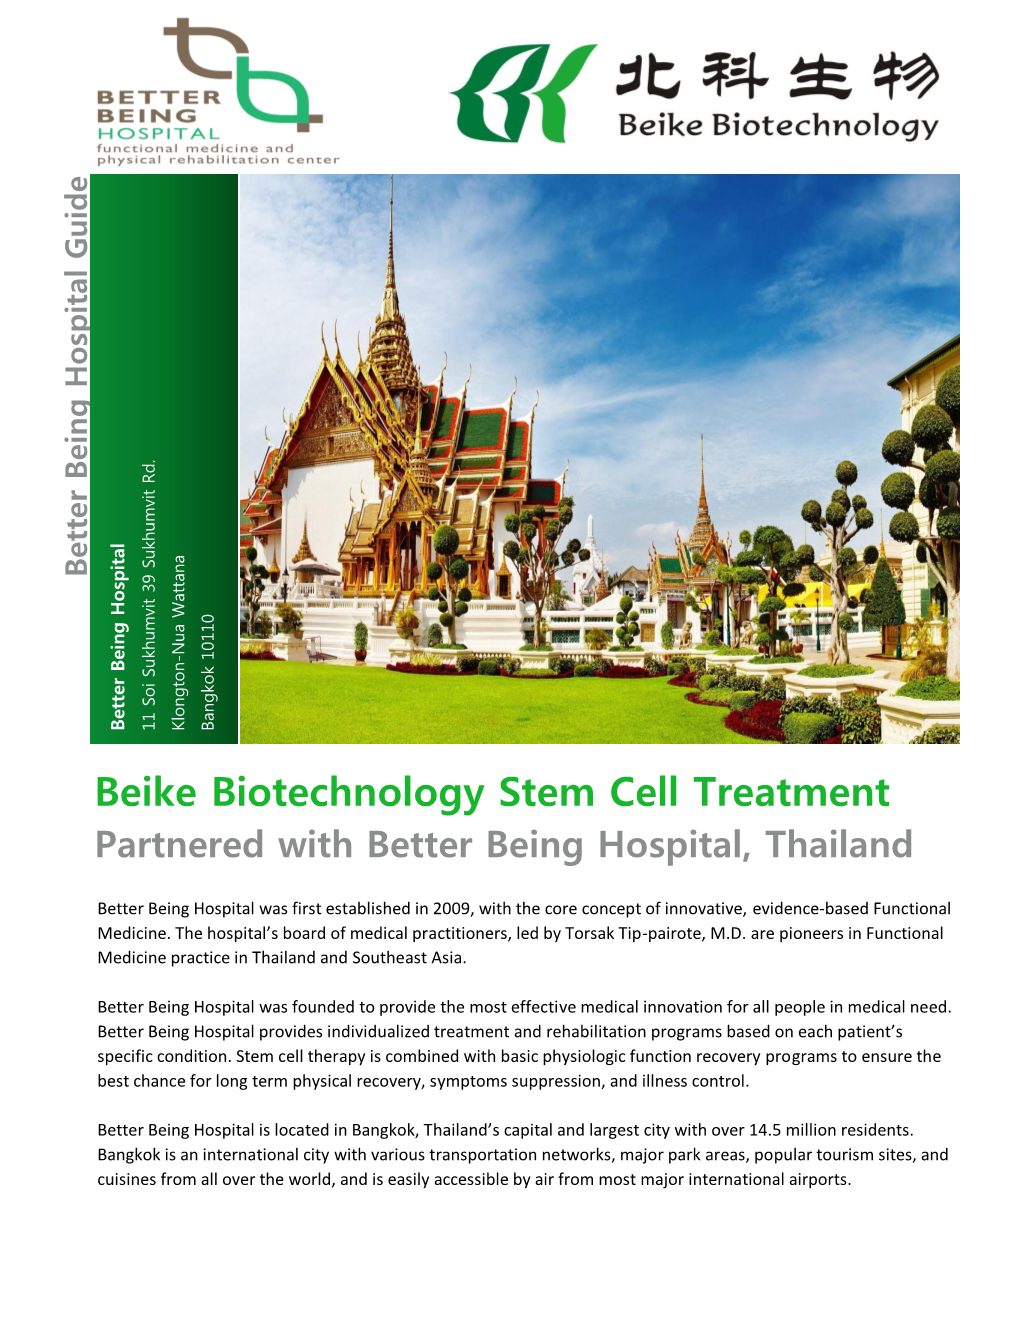 Beike Biotechnology Stem Cell Treatment Partnered with Better Being Hospital, Thailand